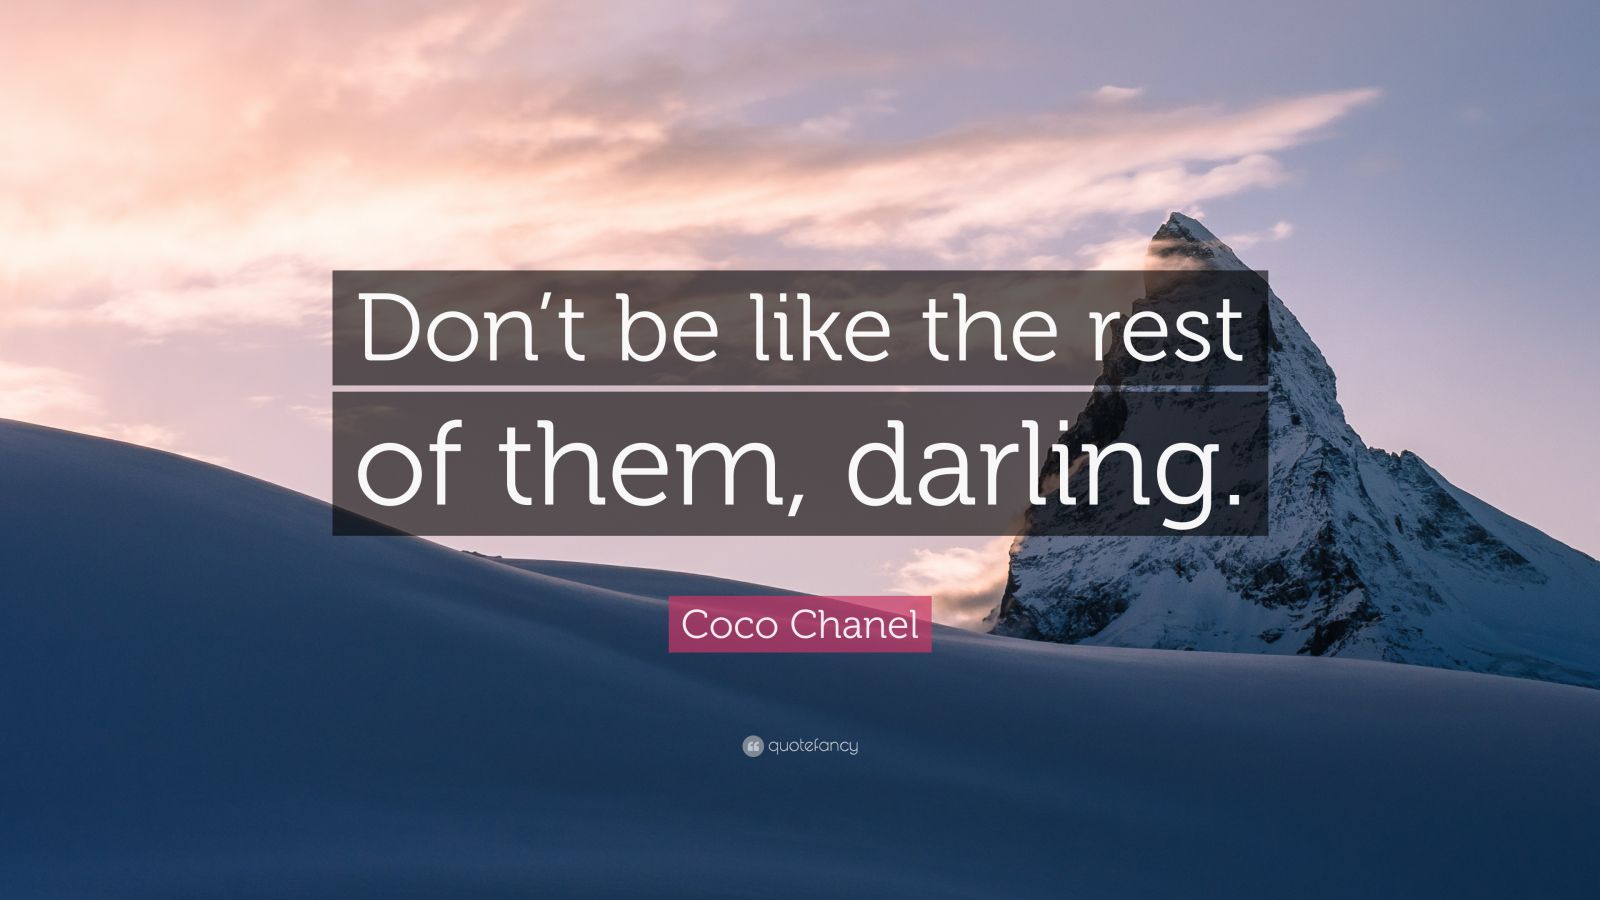 Coco Chanel Quote: “Don't be like the rest of them, darling.”